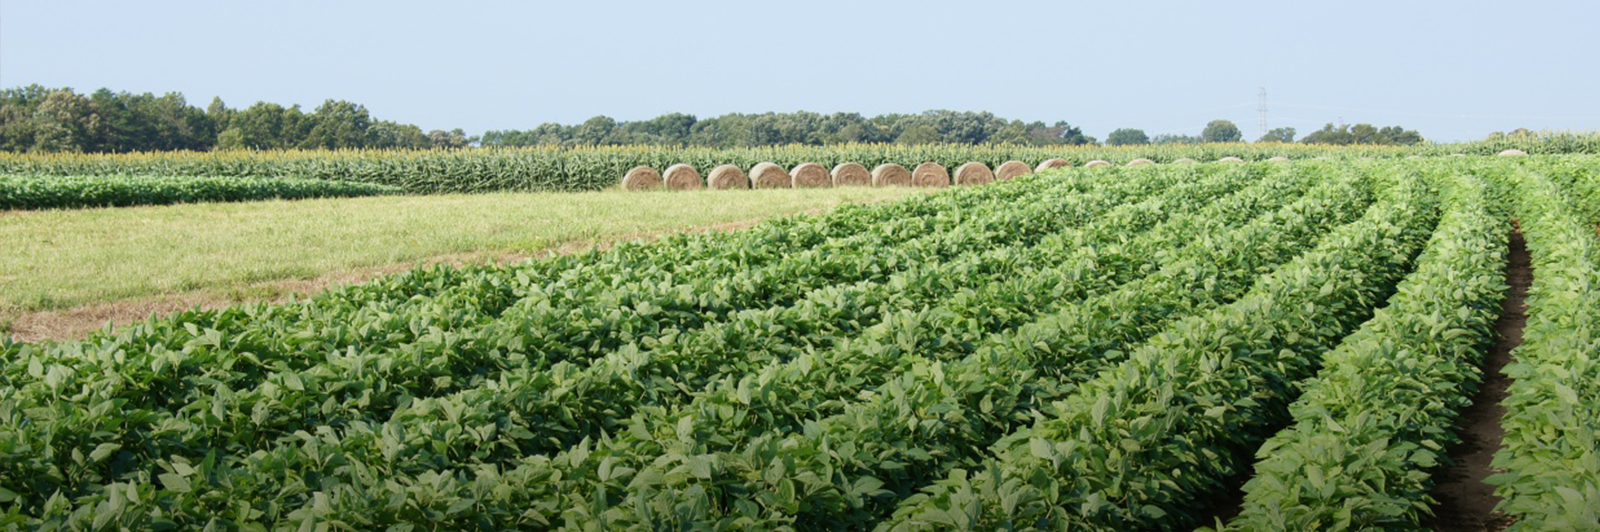 Rows of crops are seeing growing in a large field, with haybales visible in the background.